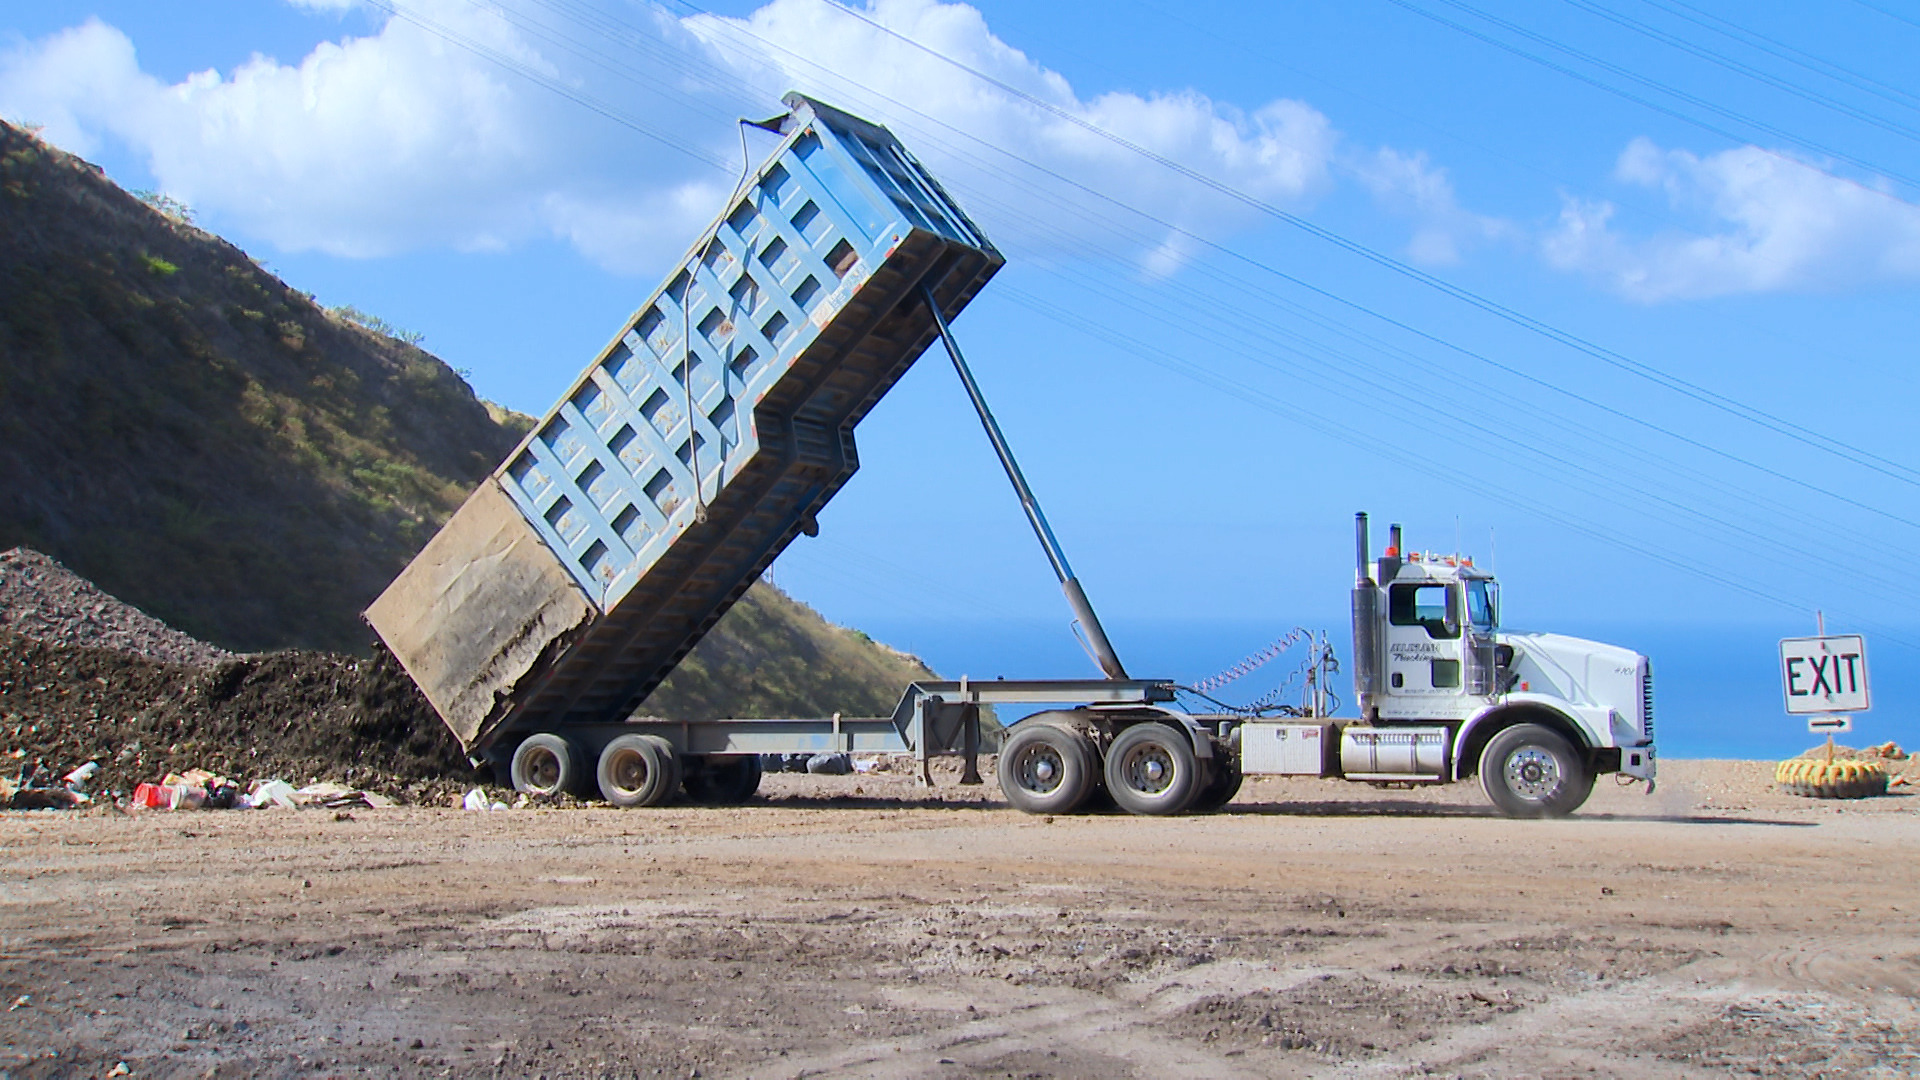 The Search For a New Oʻahu Landfill